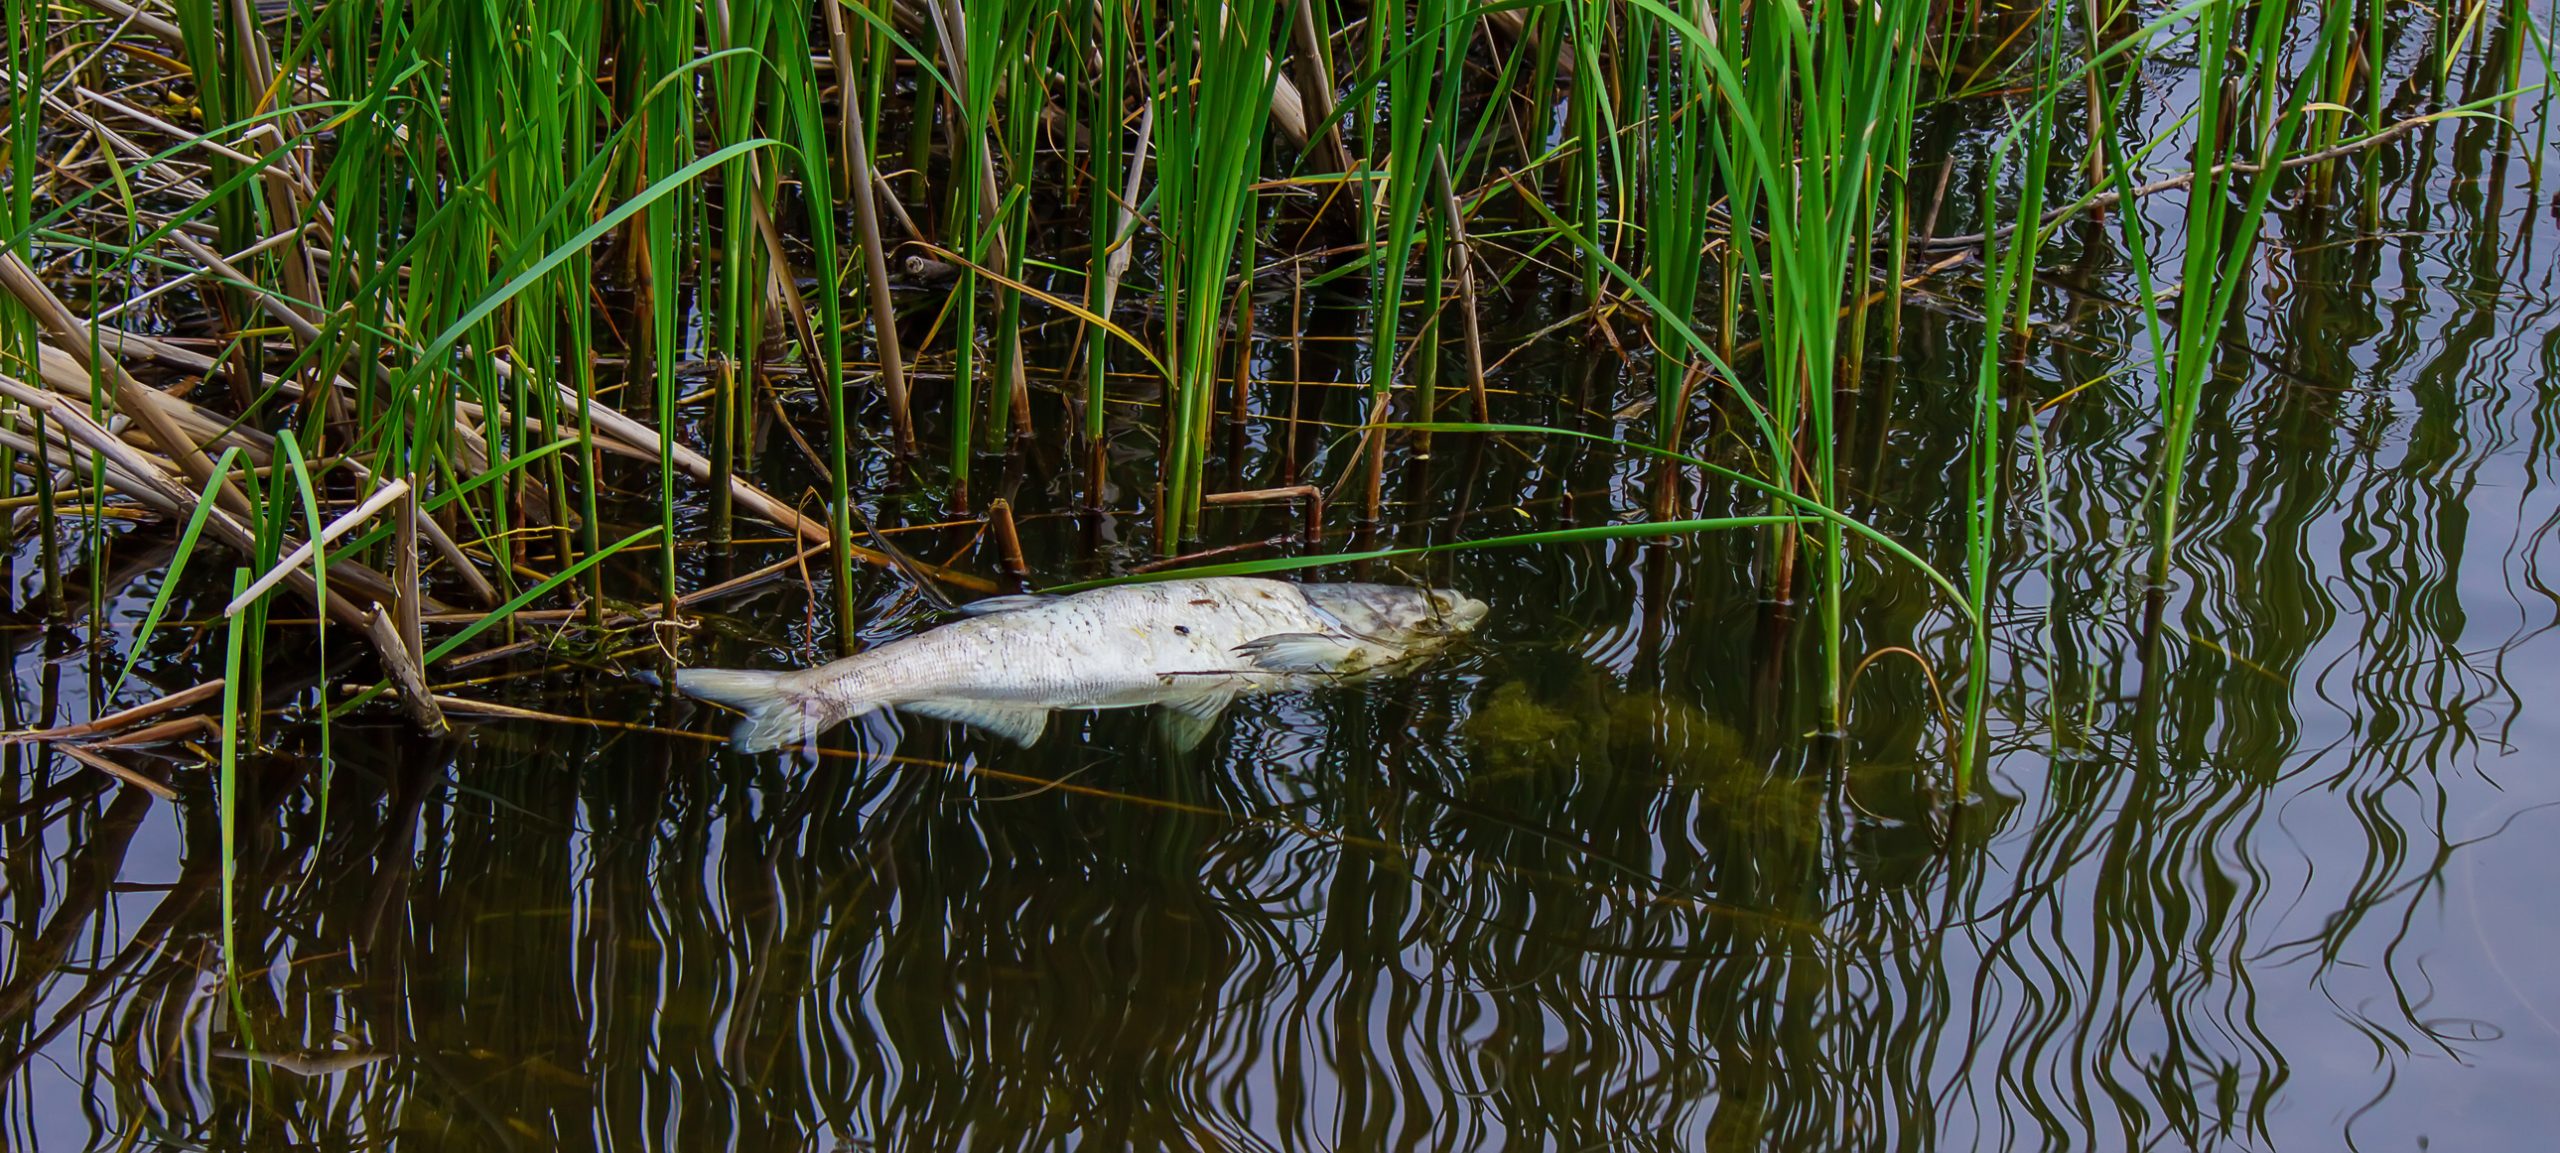 Water pollution. The fish dies in dirty water. (Photo: iStock - Anna Solovei)